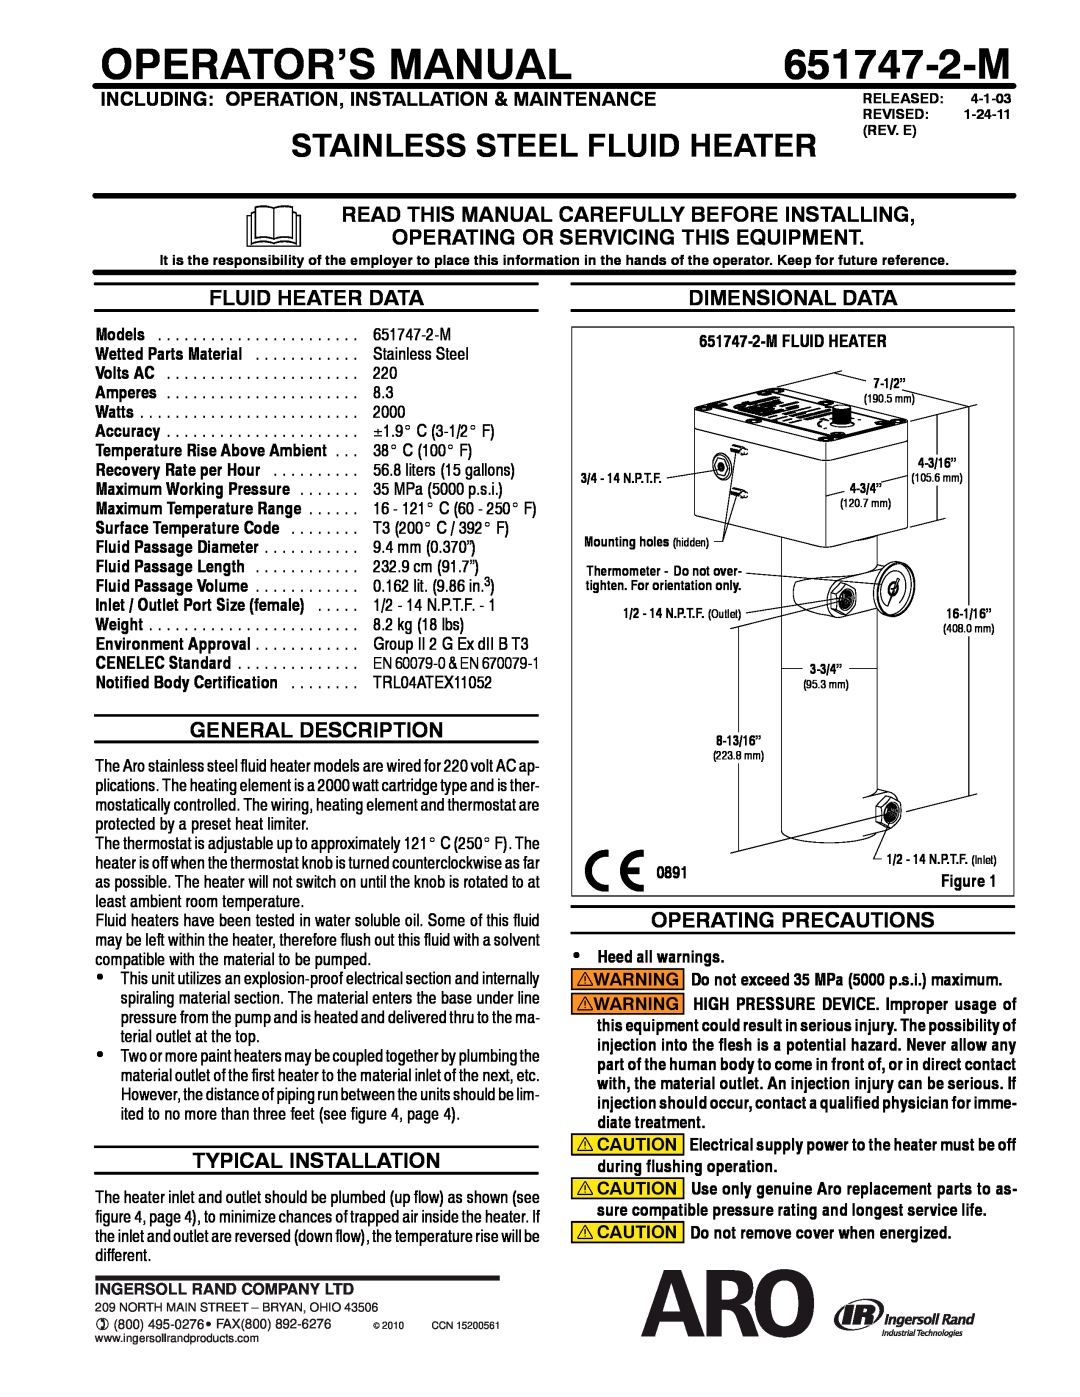 Ingersoll-Rand 651747-2-M manual Read This Manual Carefully Before Installing, Operating Or Servicing This Equipment 